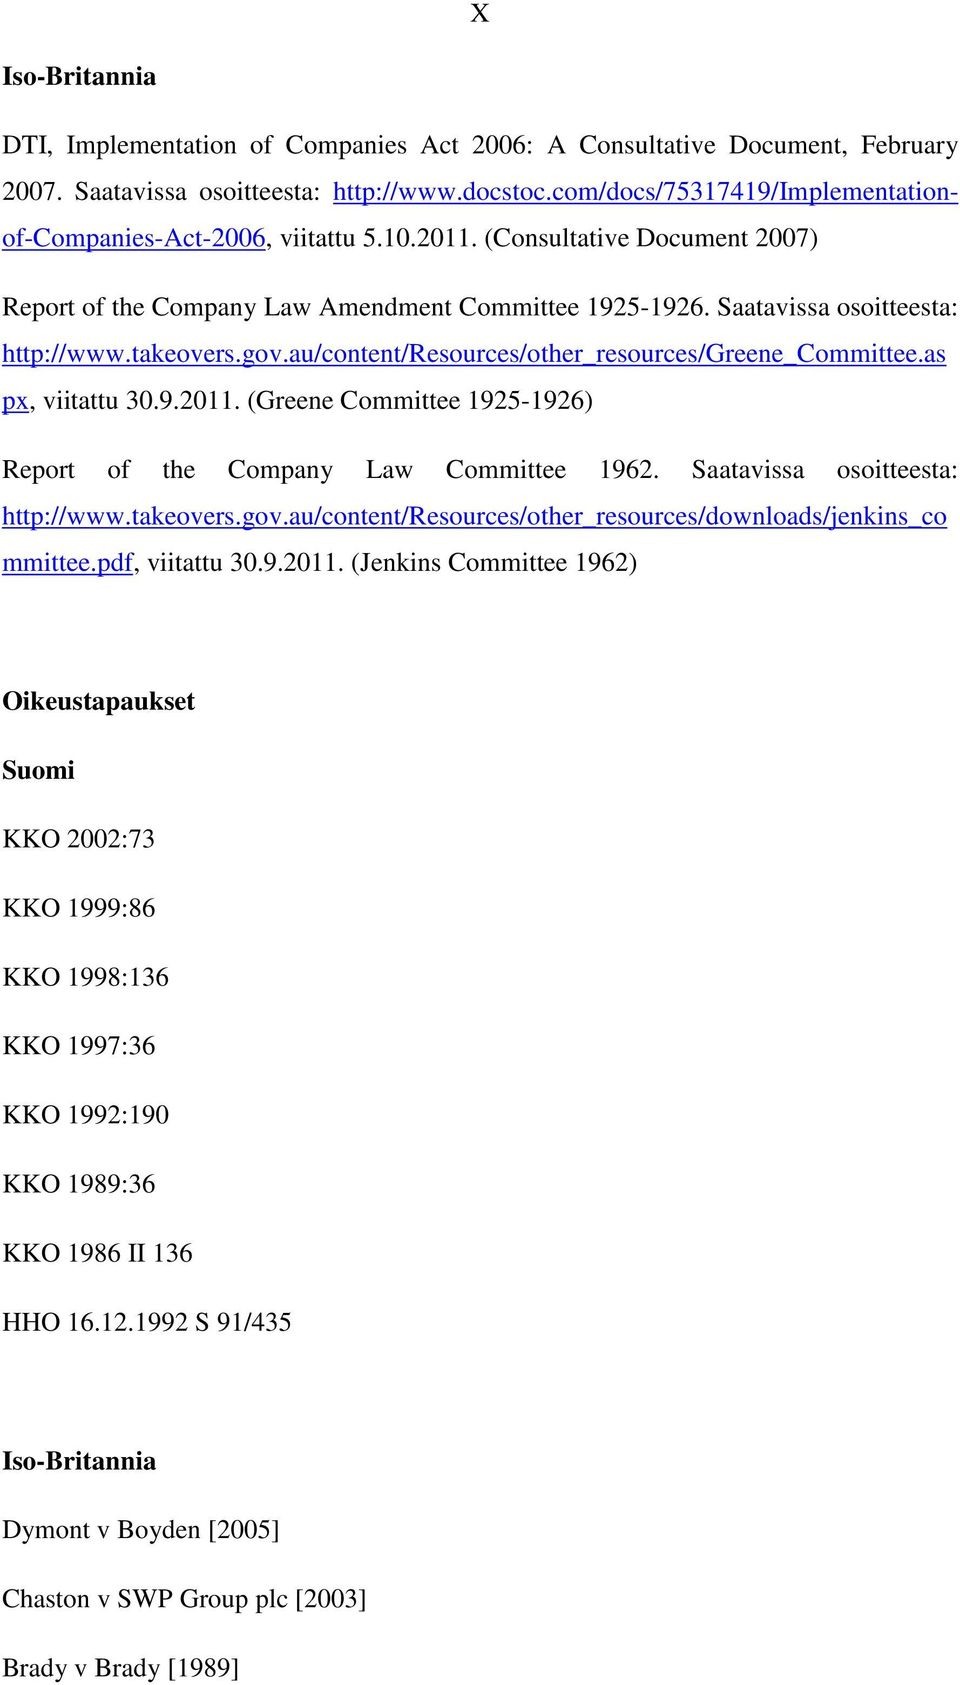 takeovers.gov.au/content/resources/other_resources/greene_committee.as px, viitattu 30.9.2011. (Greene Committee 1925-1926) Report of the Company Law Committee 1962.